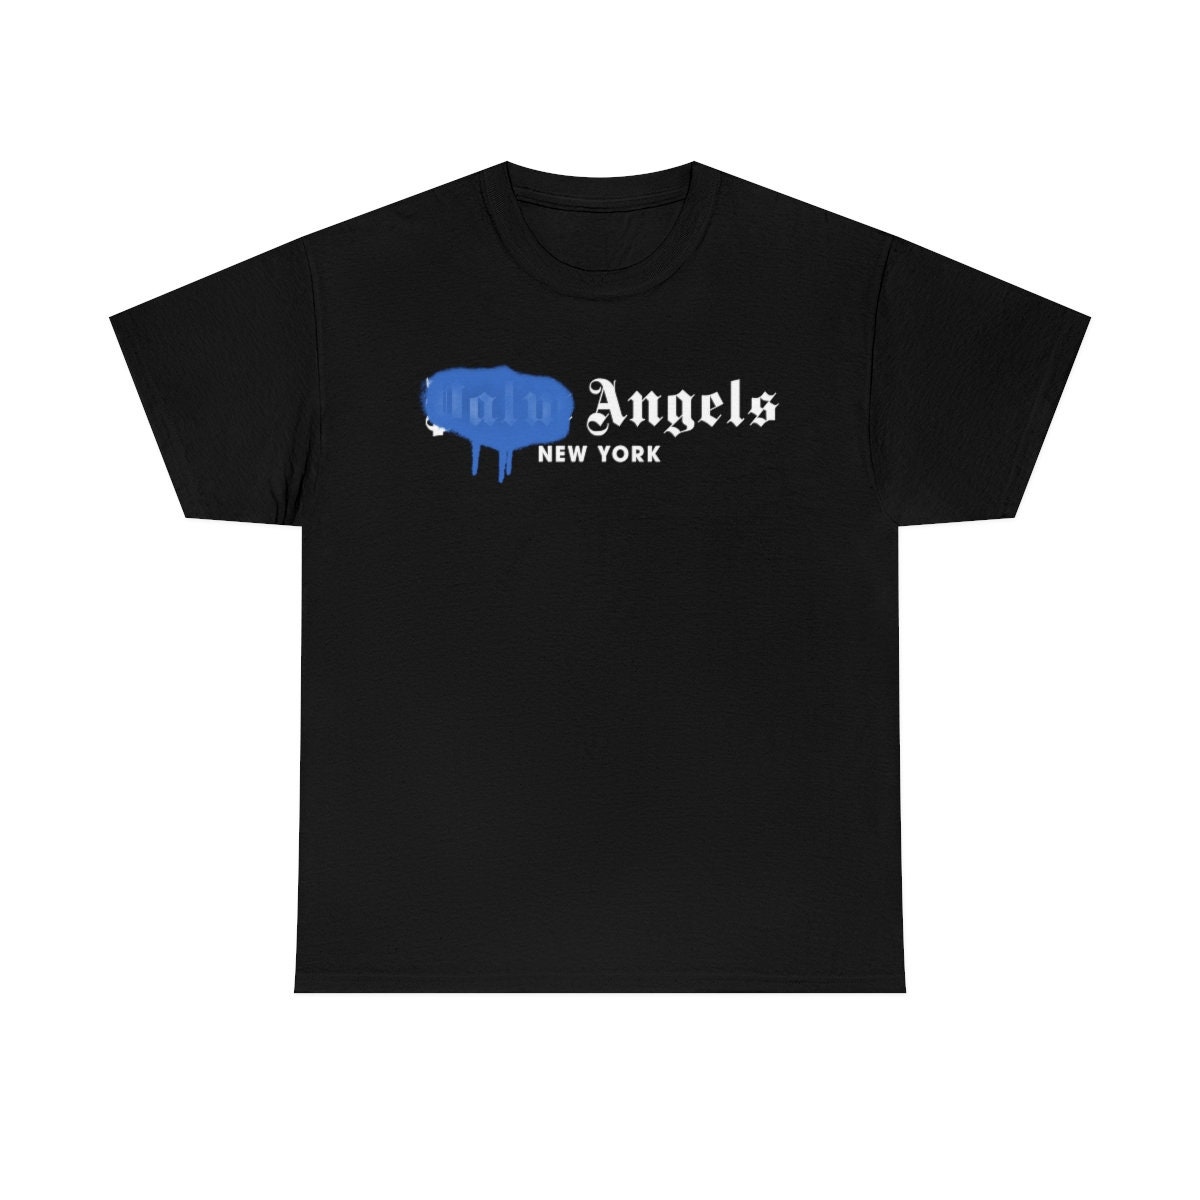 Palm Angels New York T Shirt sold by Racial Philomena